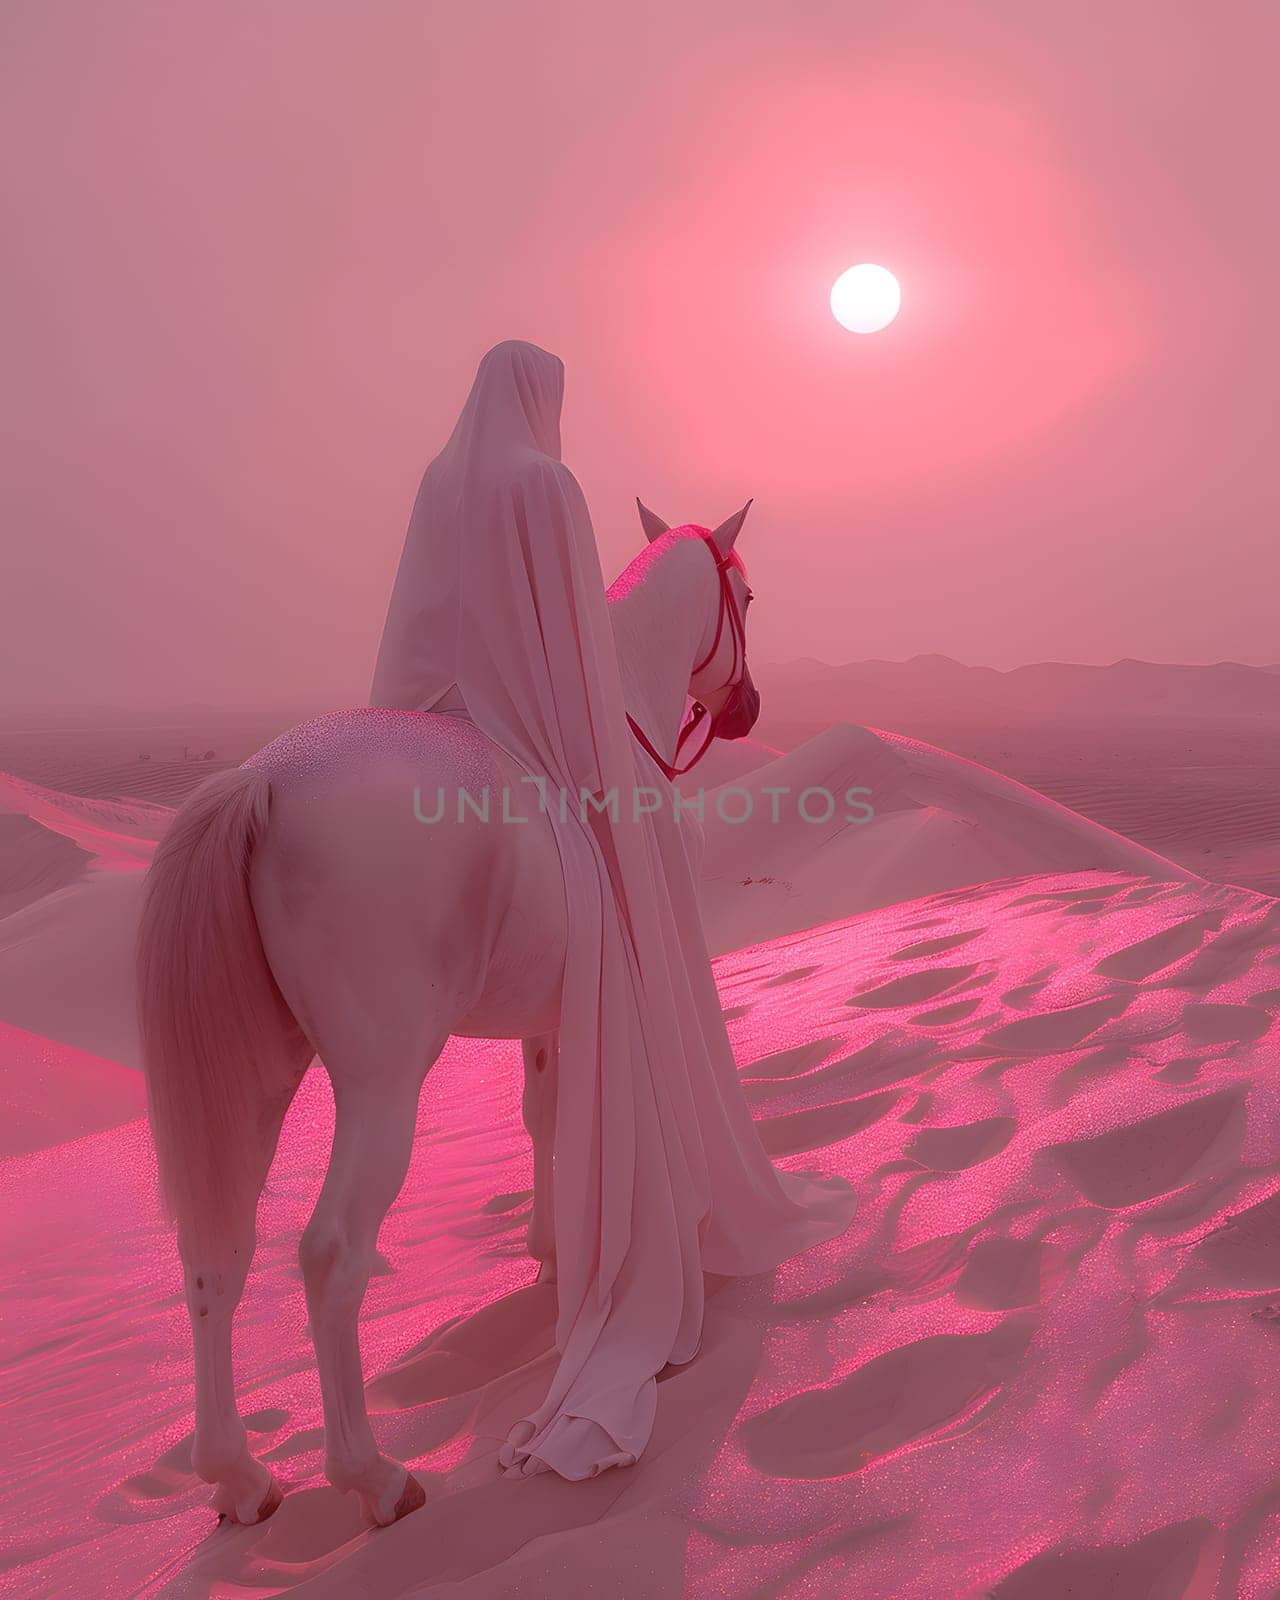 A woman in a white dress is enjoying a fun ride on a white horse in the desert landscape under a magenta sky